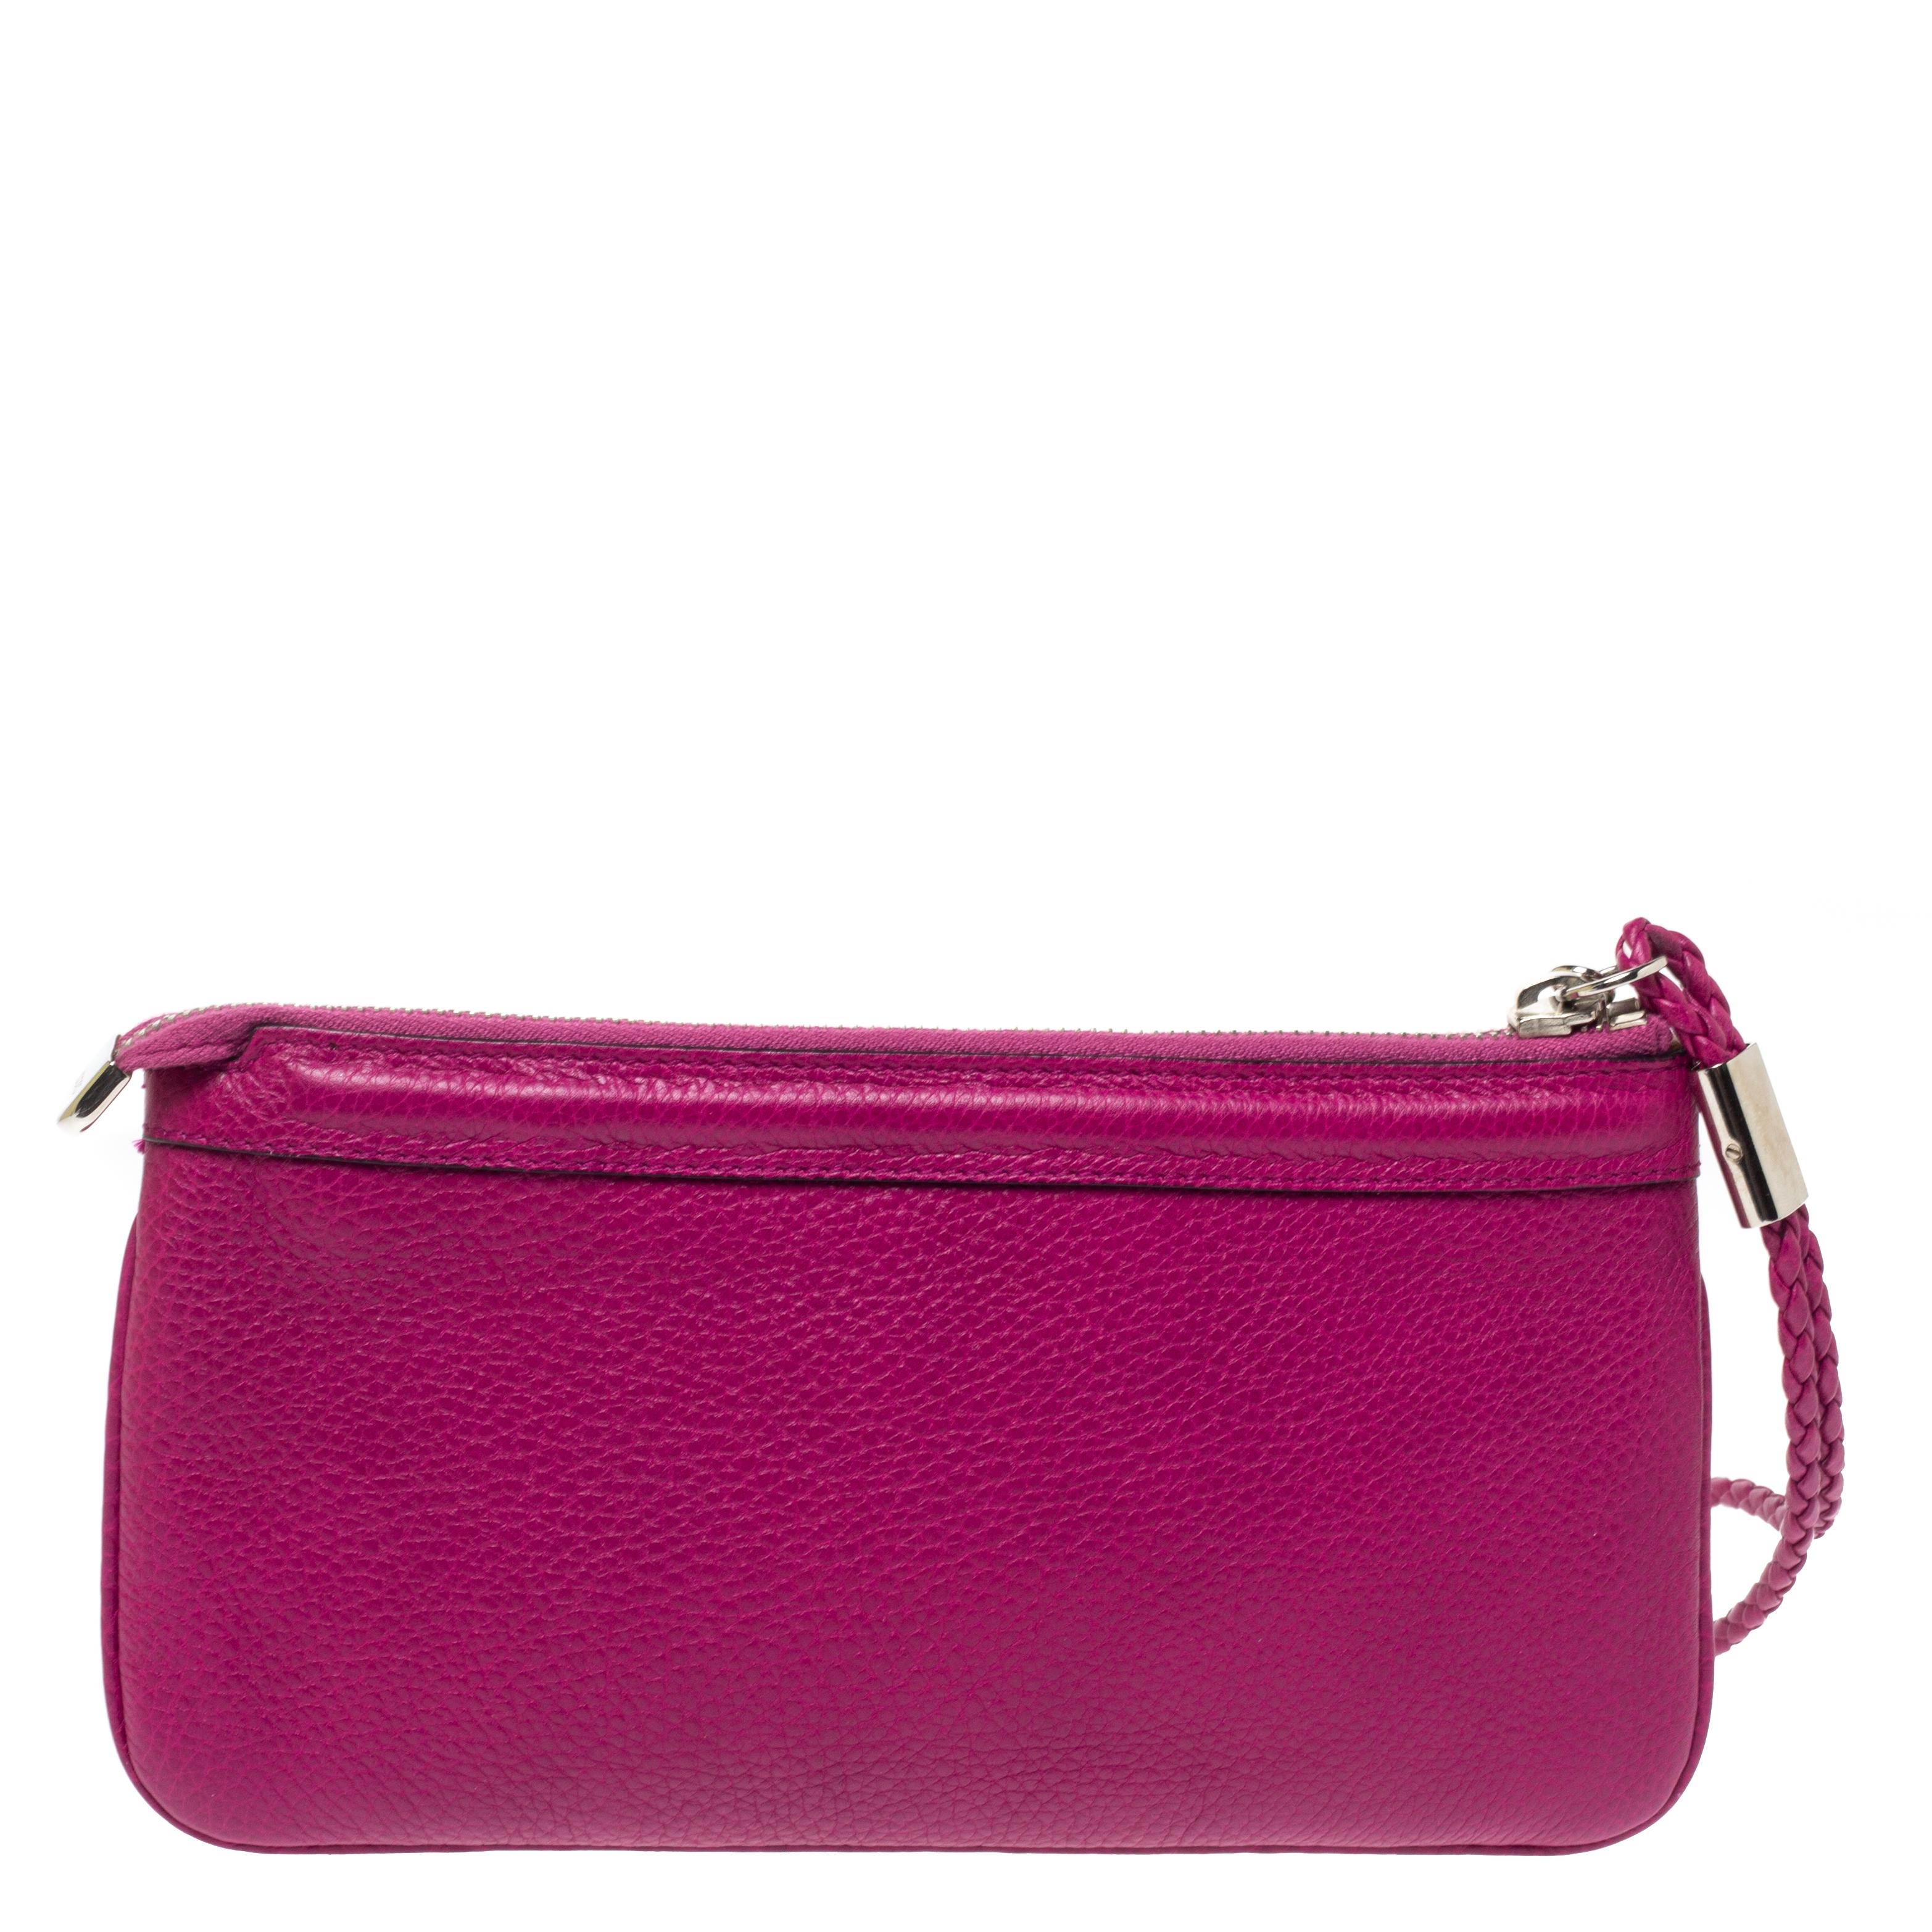 Have all eyes on you when you flaunt this stunner of a clutch by Gucci. Crafted from leather, it has a breathtaking magenta shade and a lovely shape. The clutch is equipped with a wristlet strap and a fabric interior that will hold your cards, cash